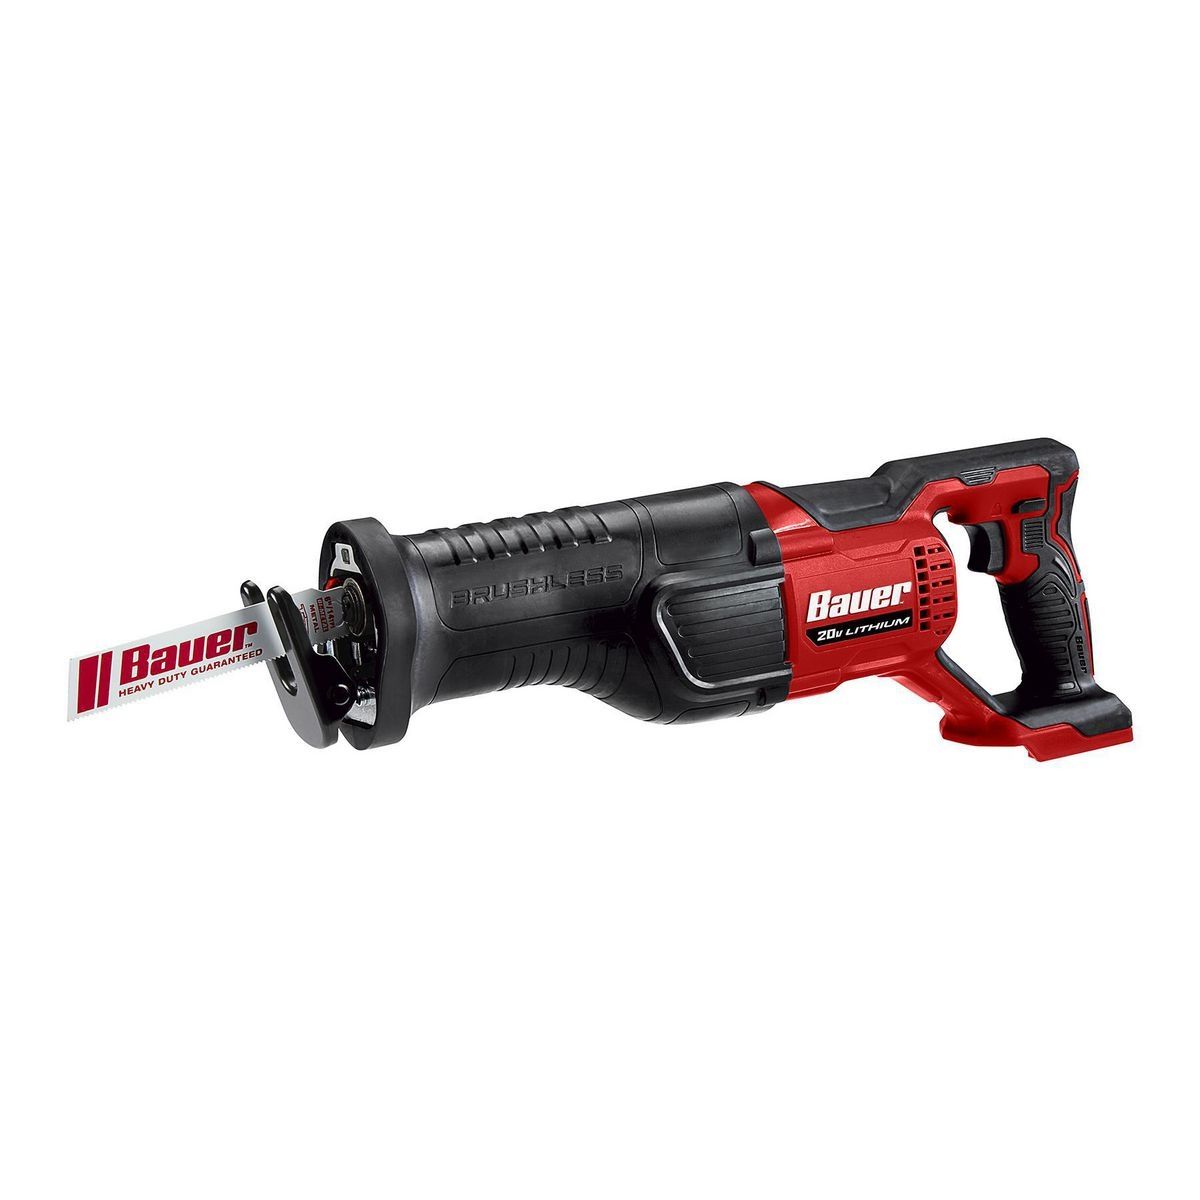 BAUER 20V Brushless Cordless Reciprocating Saw - Tool Only